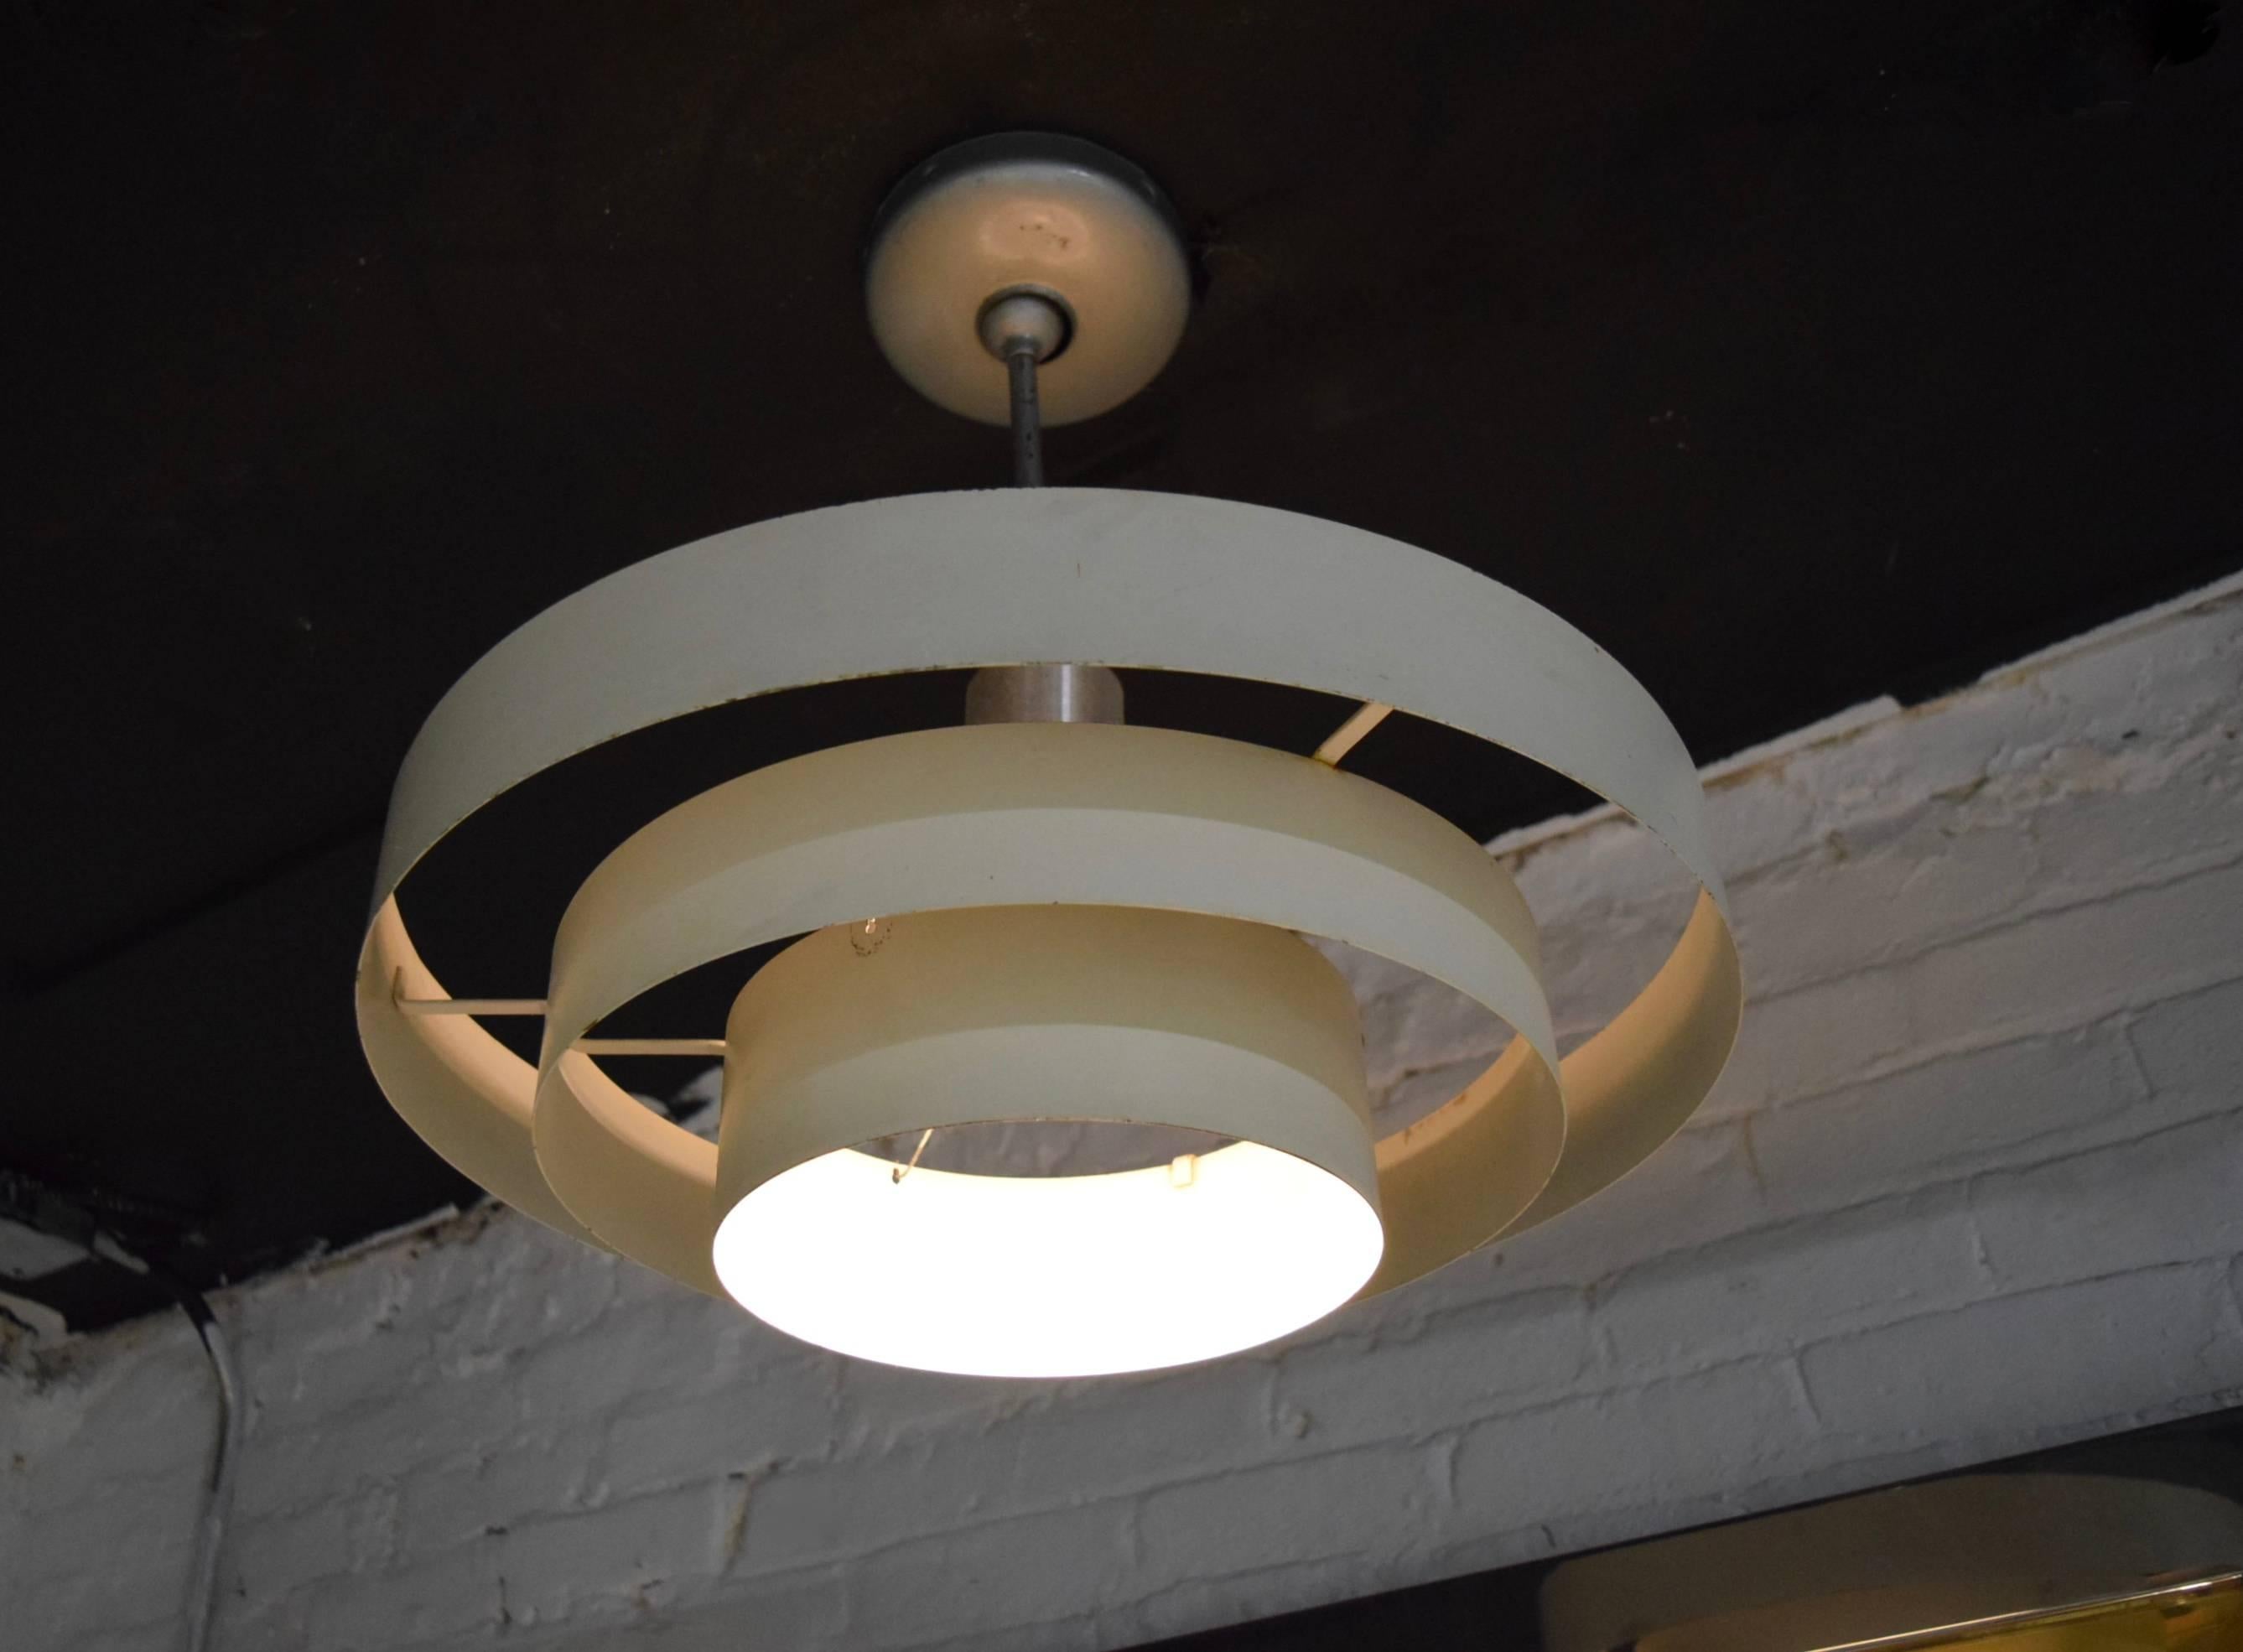 Mid-Century Modern Ceiling Fixture by Charles Eames, Made in America, circa 1950